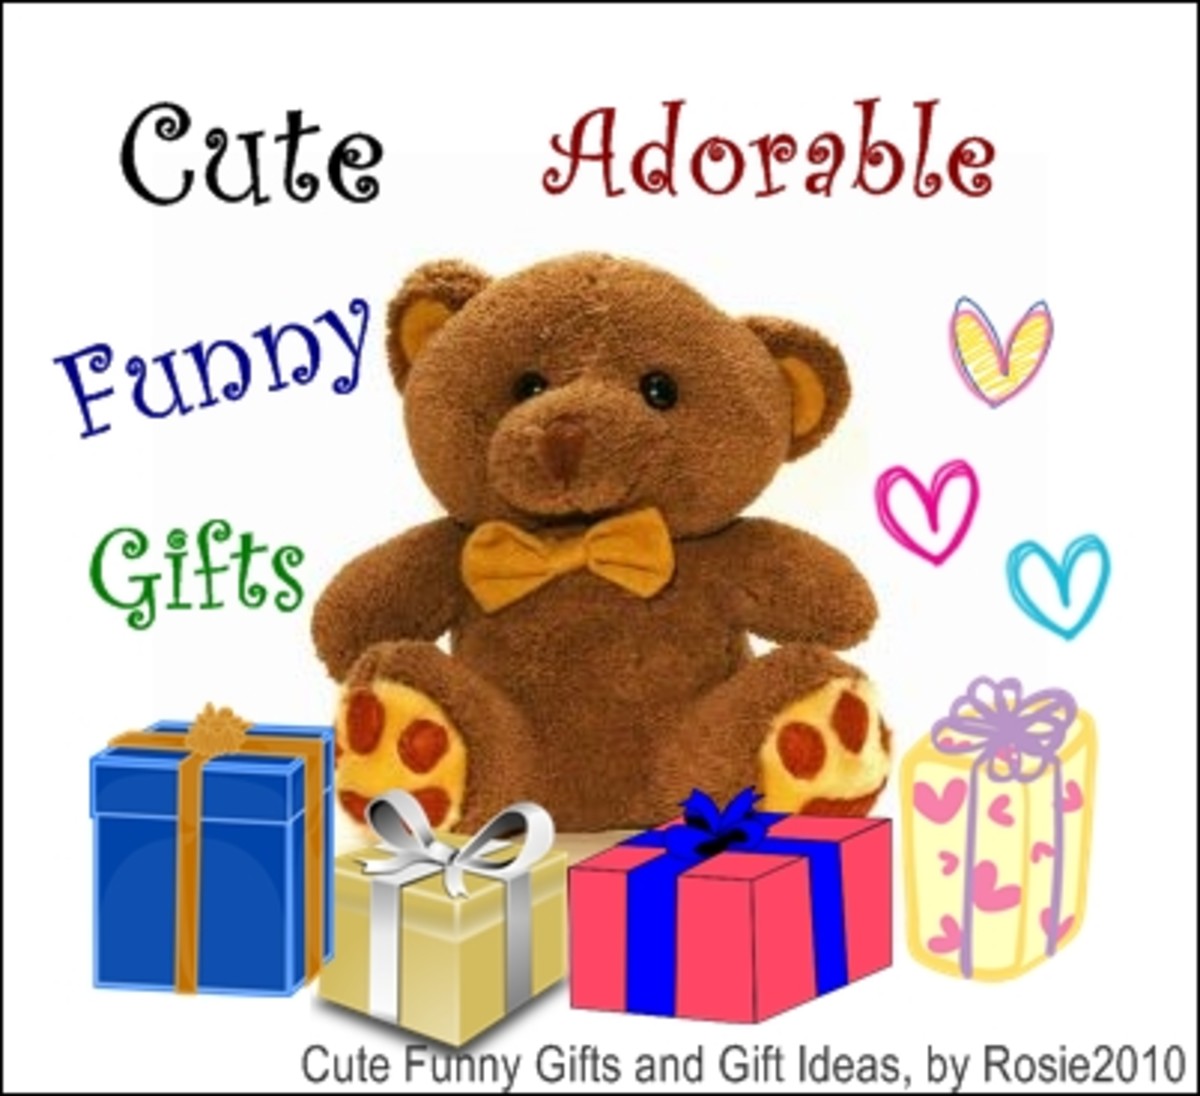 Cute Funny Gifts for under $10 $20 $30 $40 $50 Gift Ideas